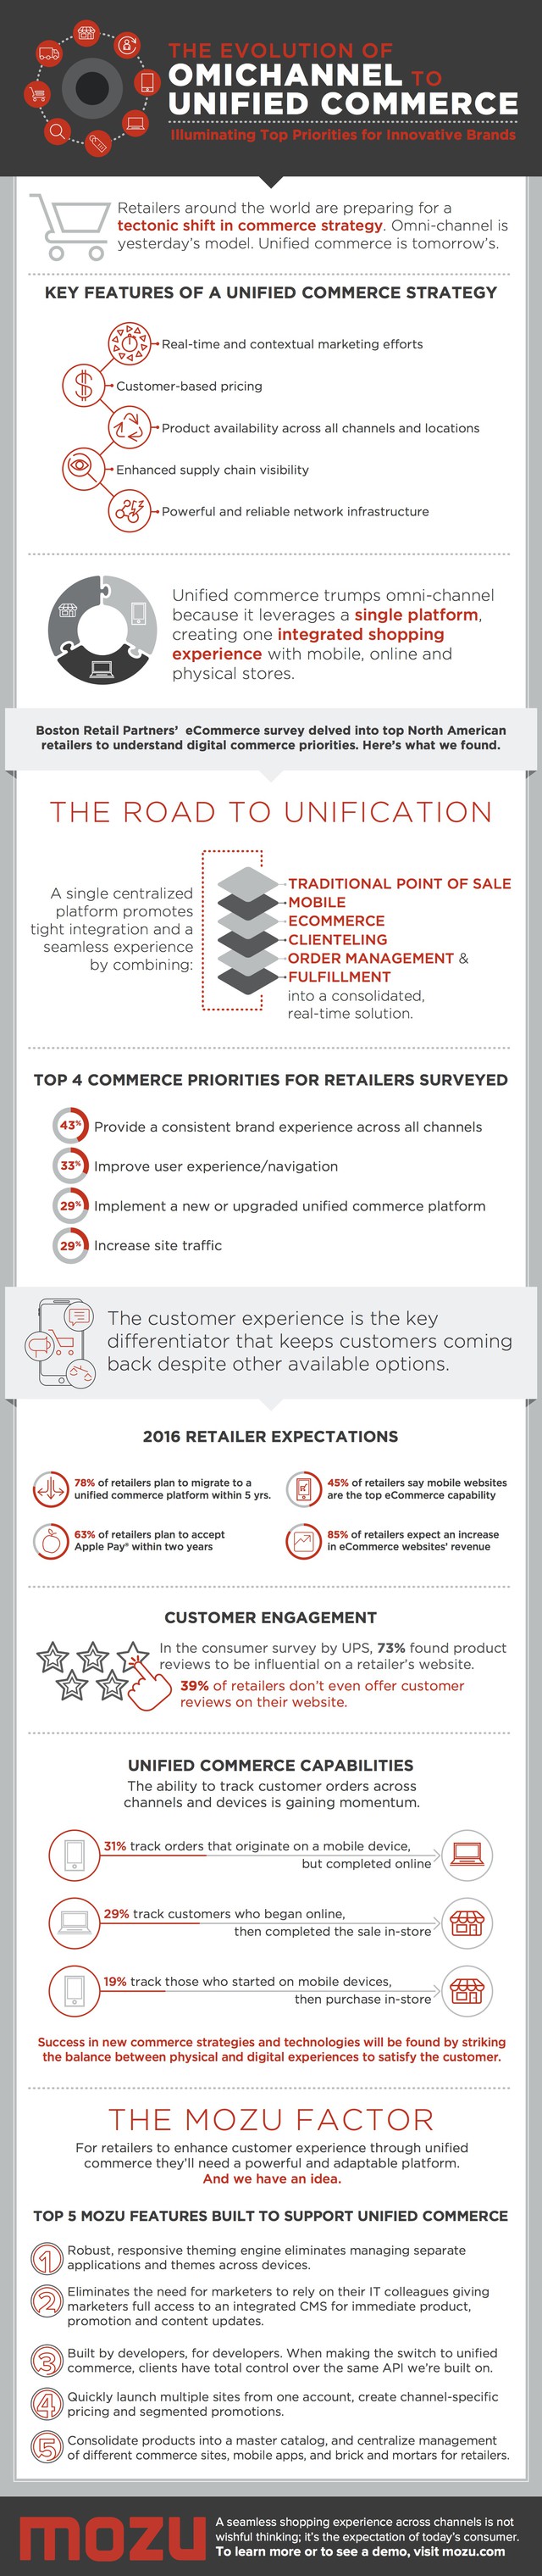 Unified commerce infographic by Mozu